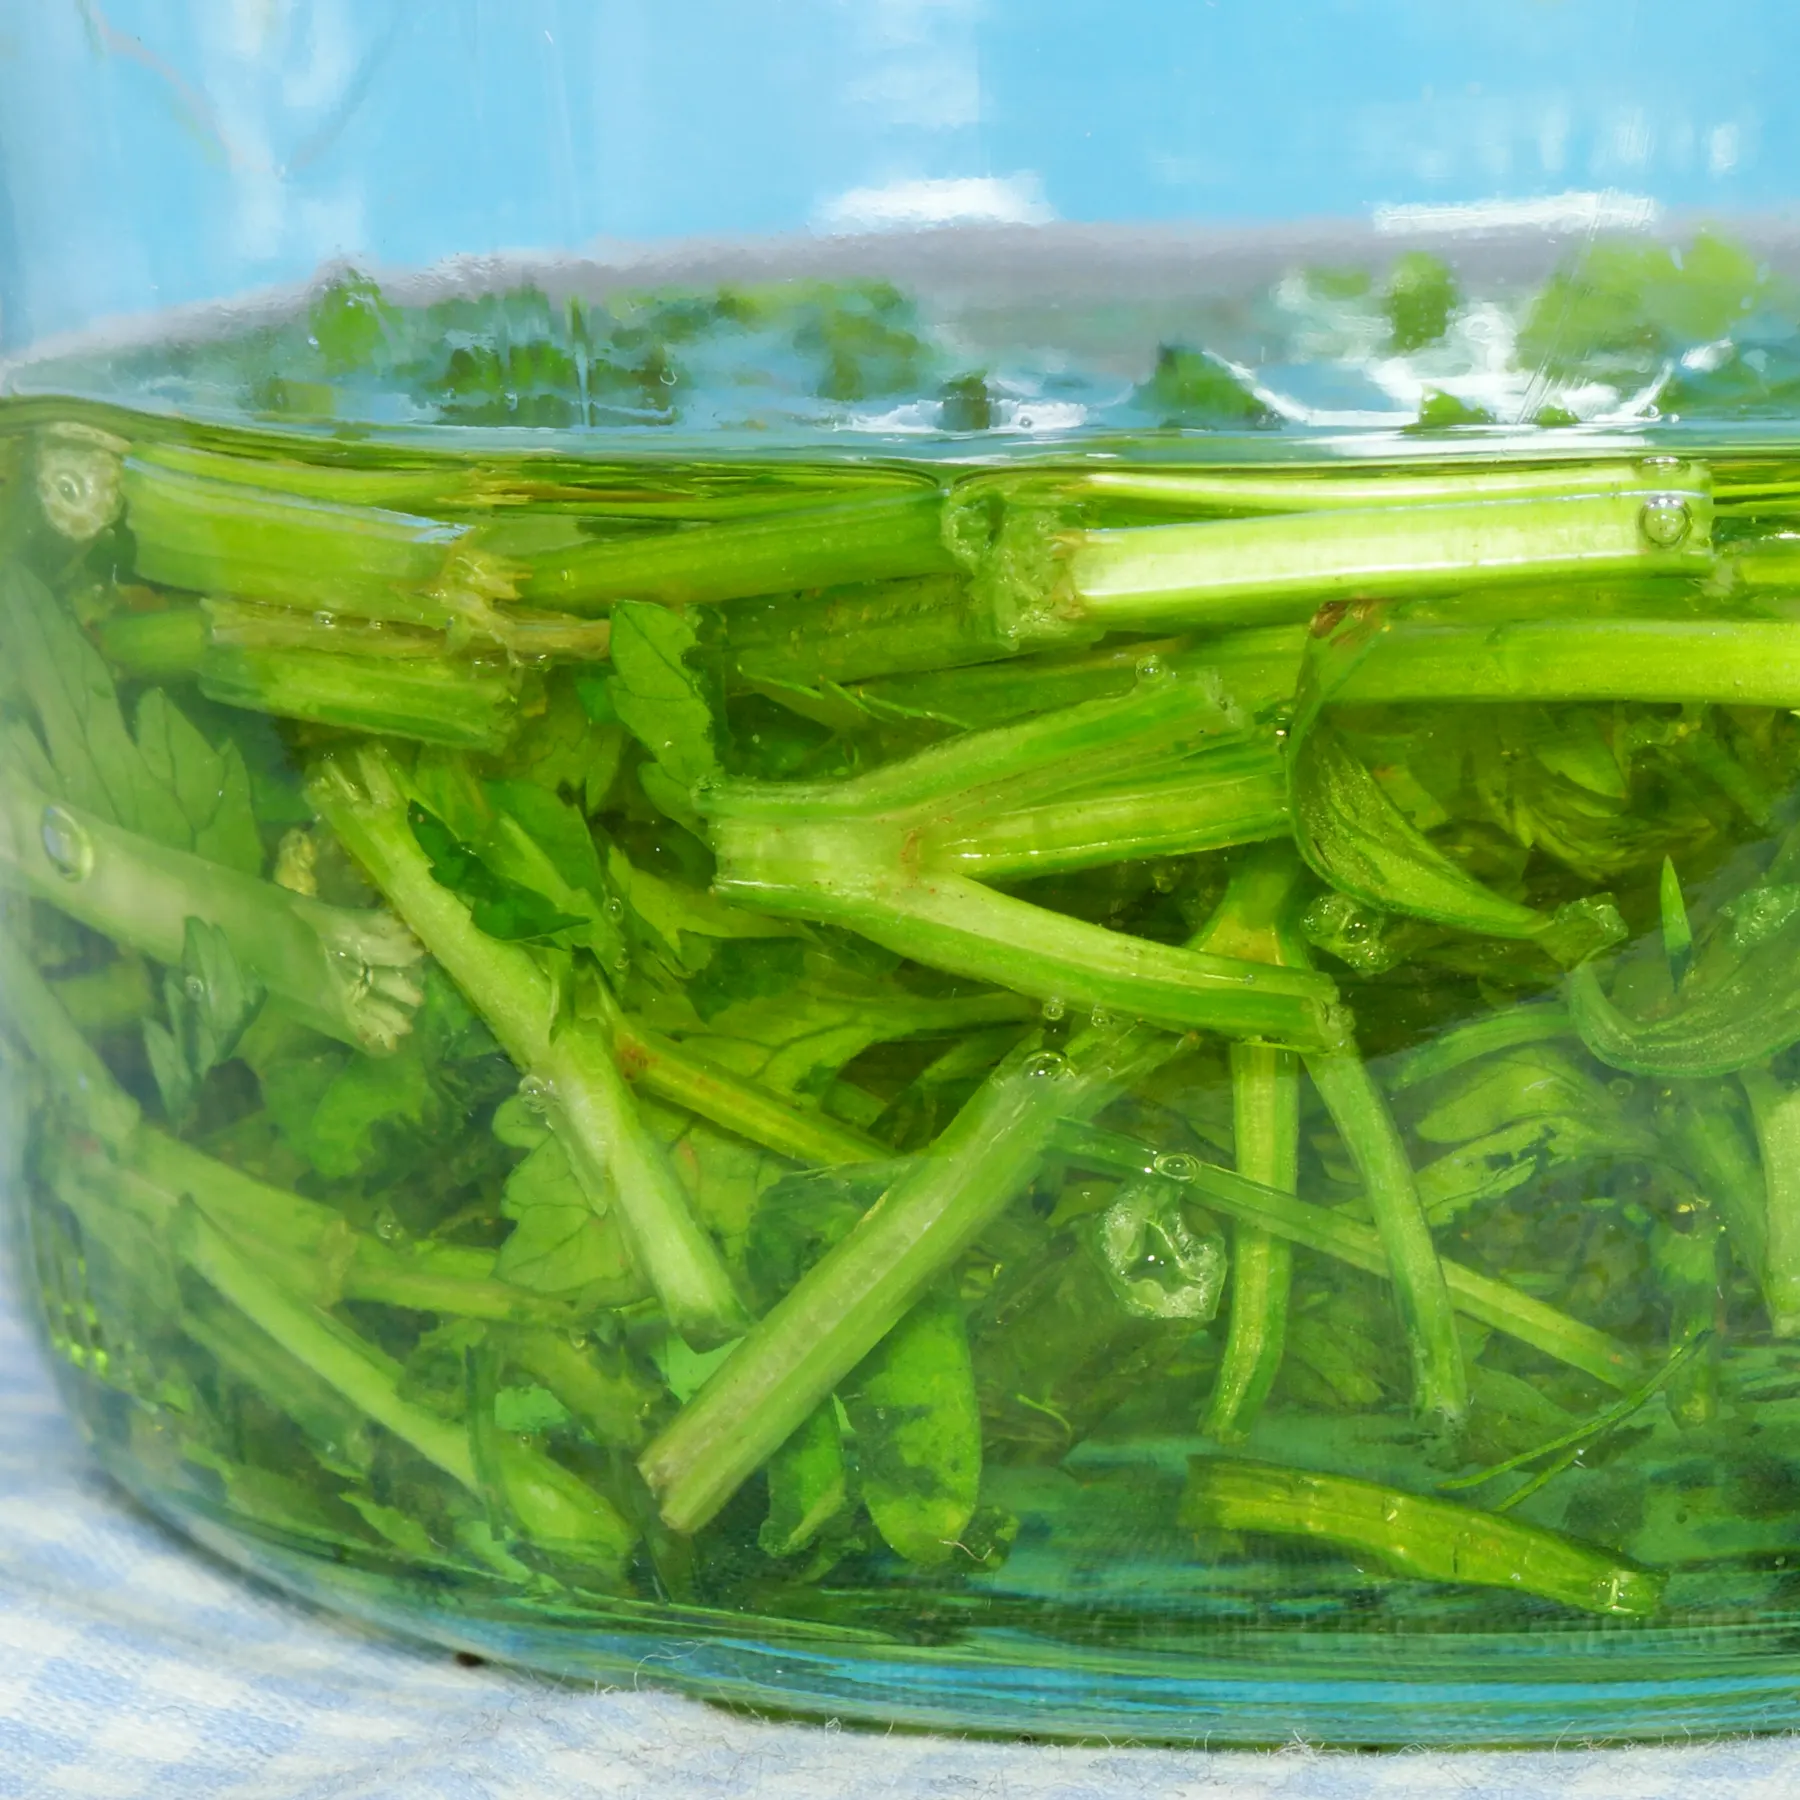 Herb oil from parsley stems